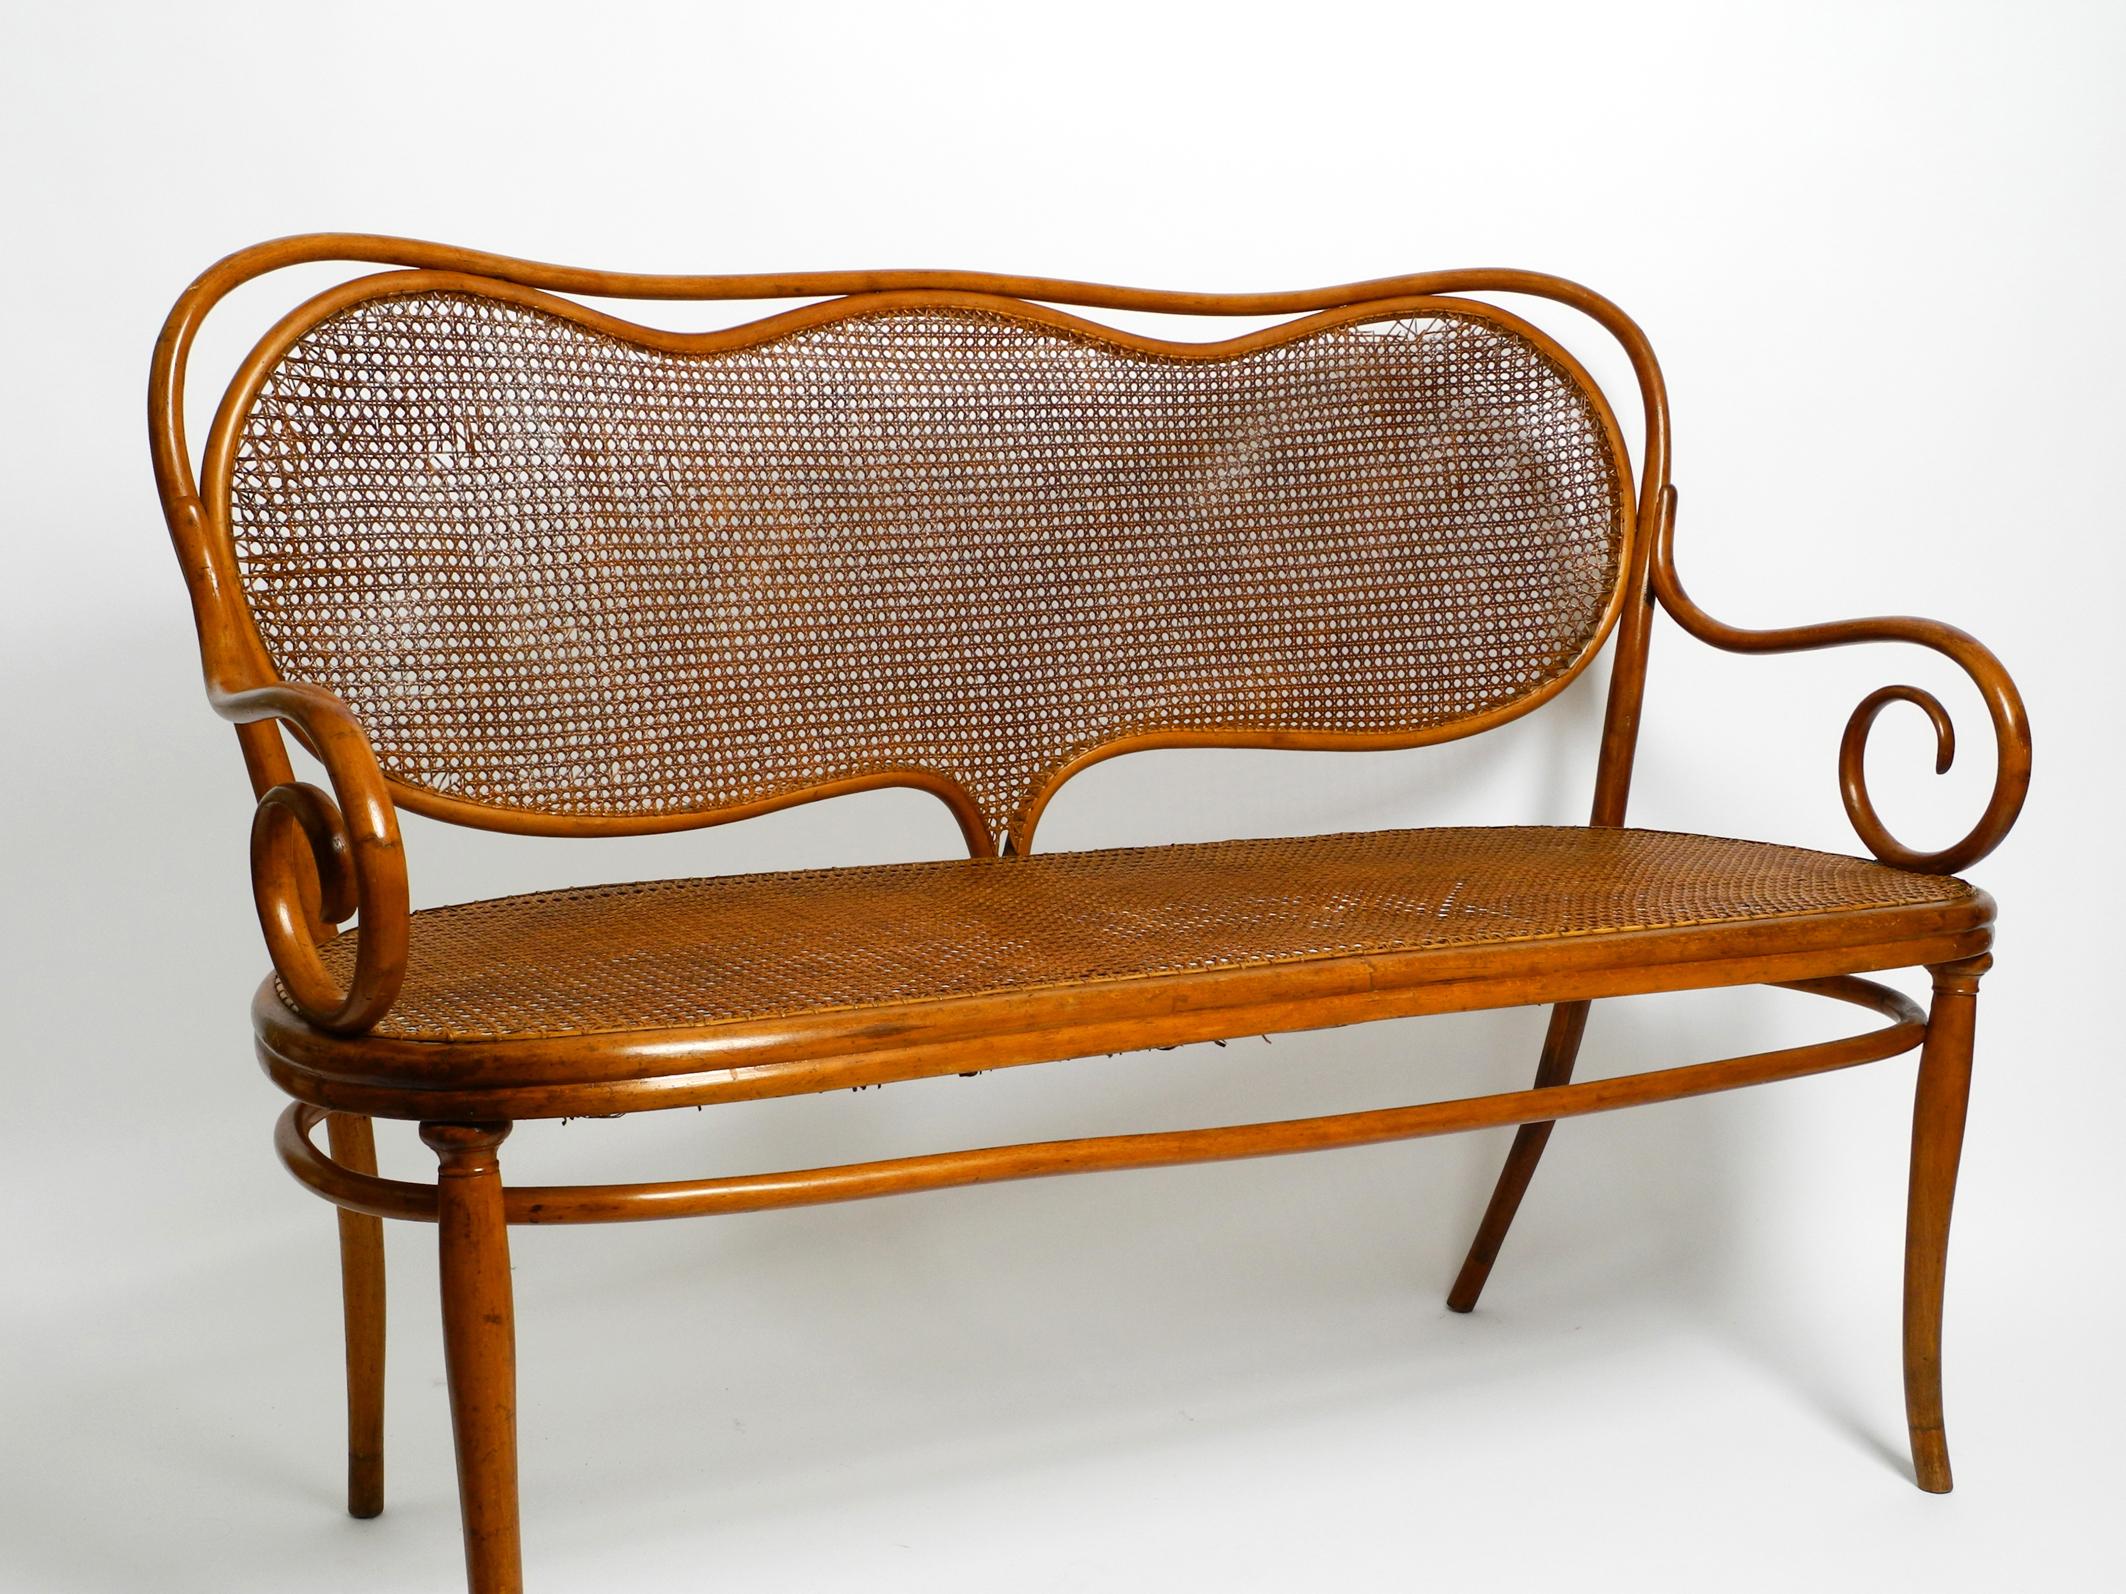 Austrian Bench No. 5 Thonet 1858 made of bent beech and wickerwork | restoration needed For Sale